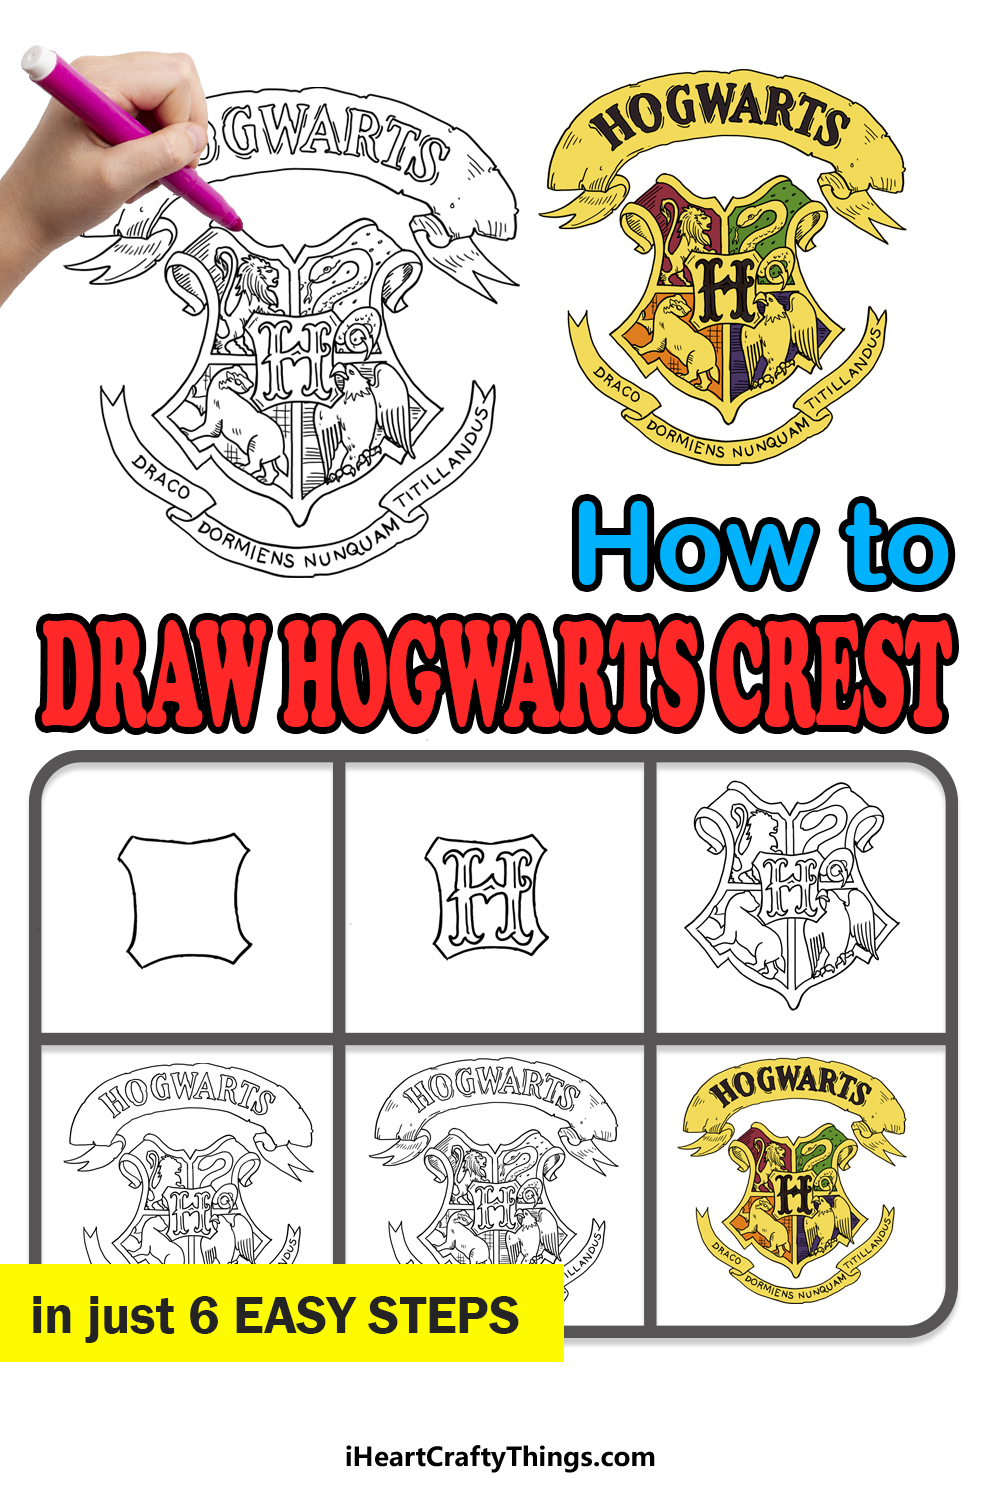 How to Draw the Hogwarts Crest step by step guide